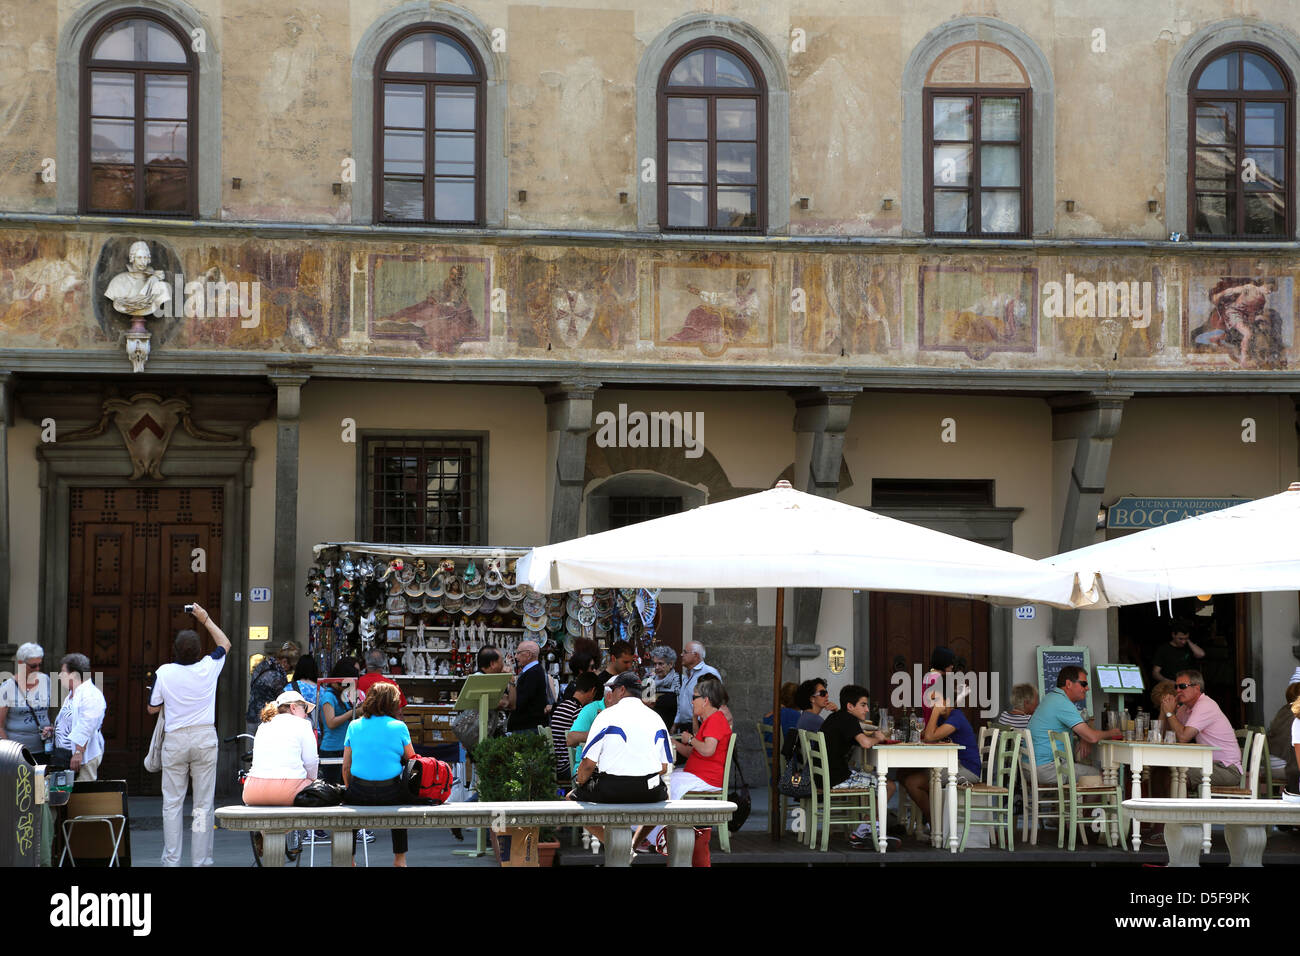 Cafe in historic Piazza di Santa Croce in Florence Italy Stock Photo